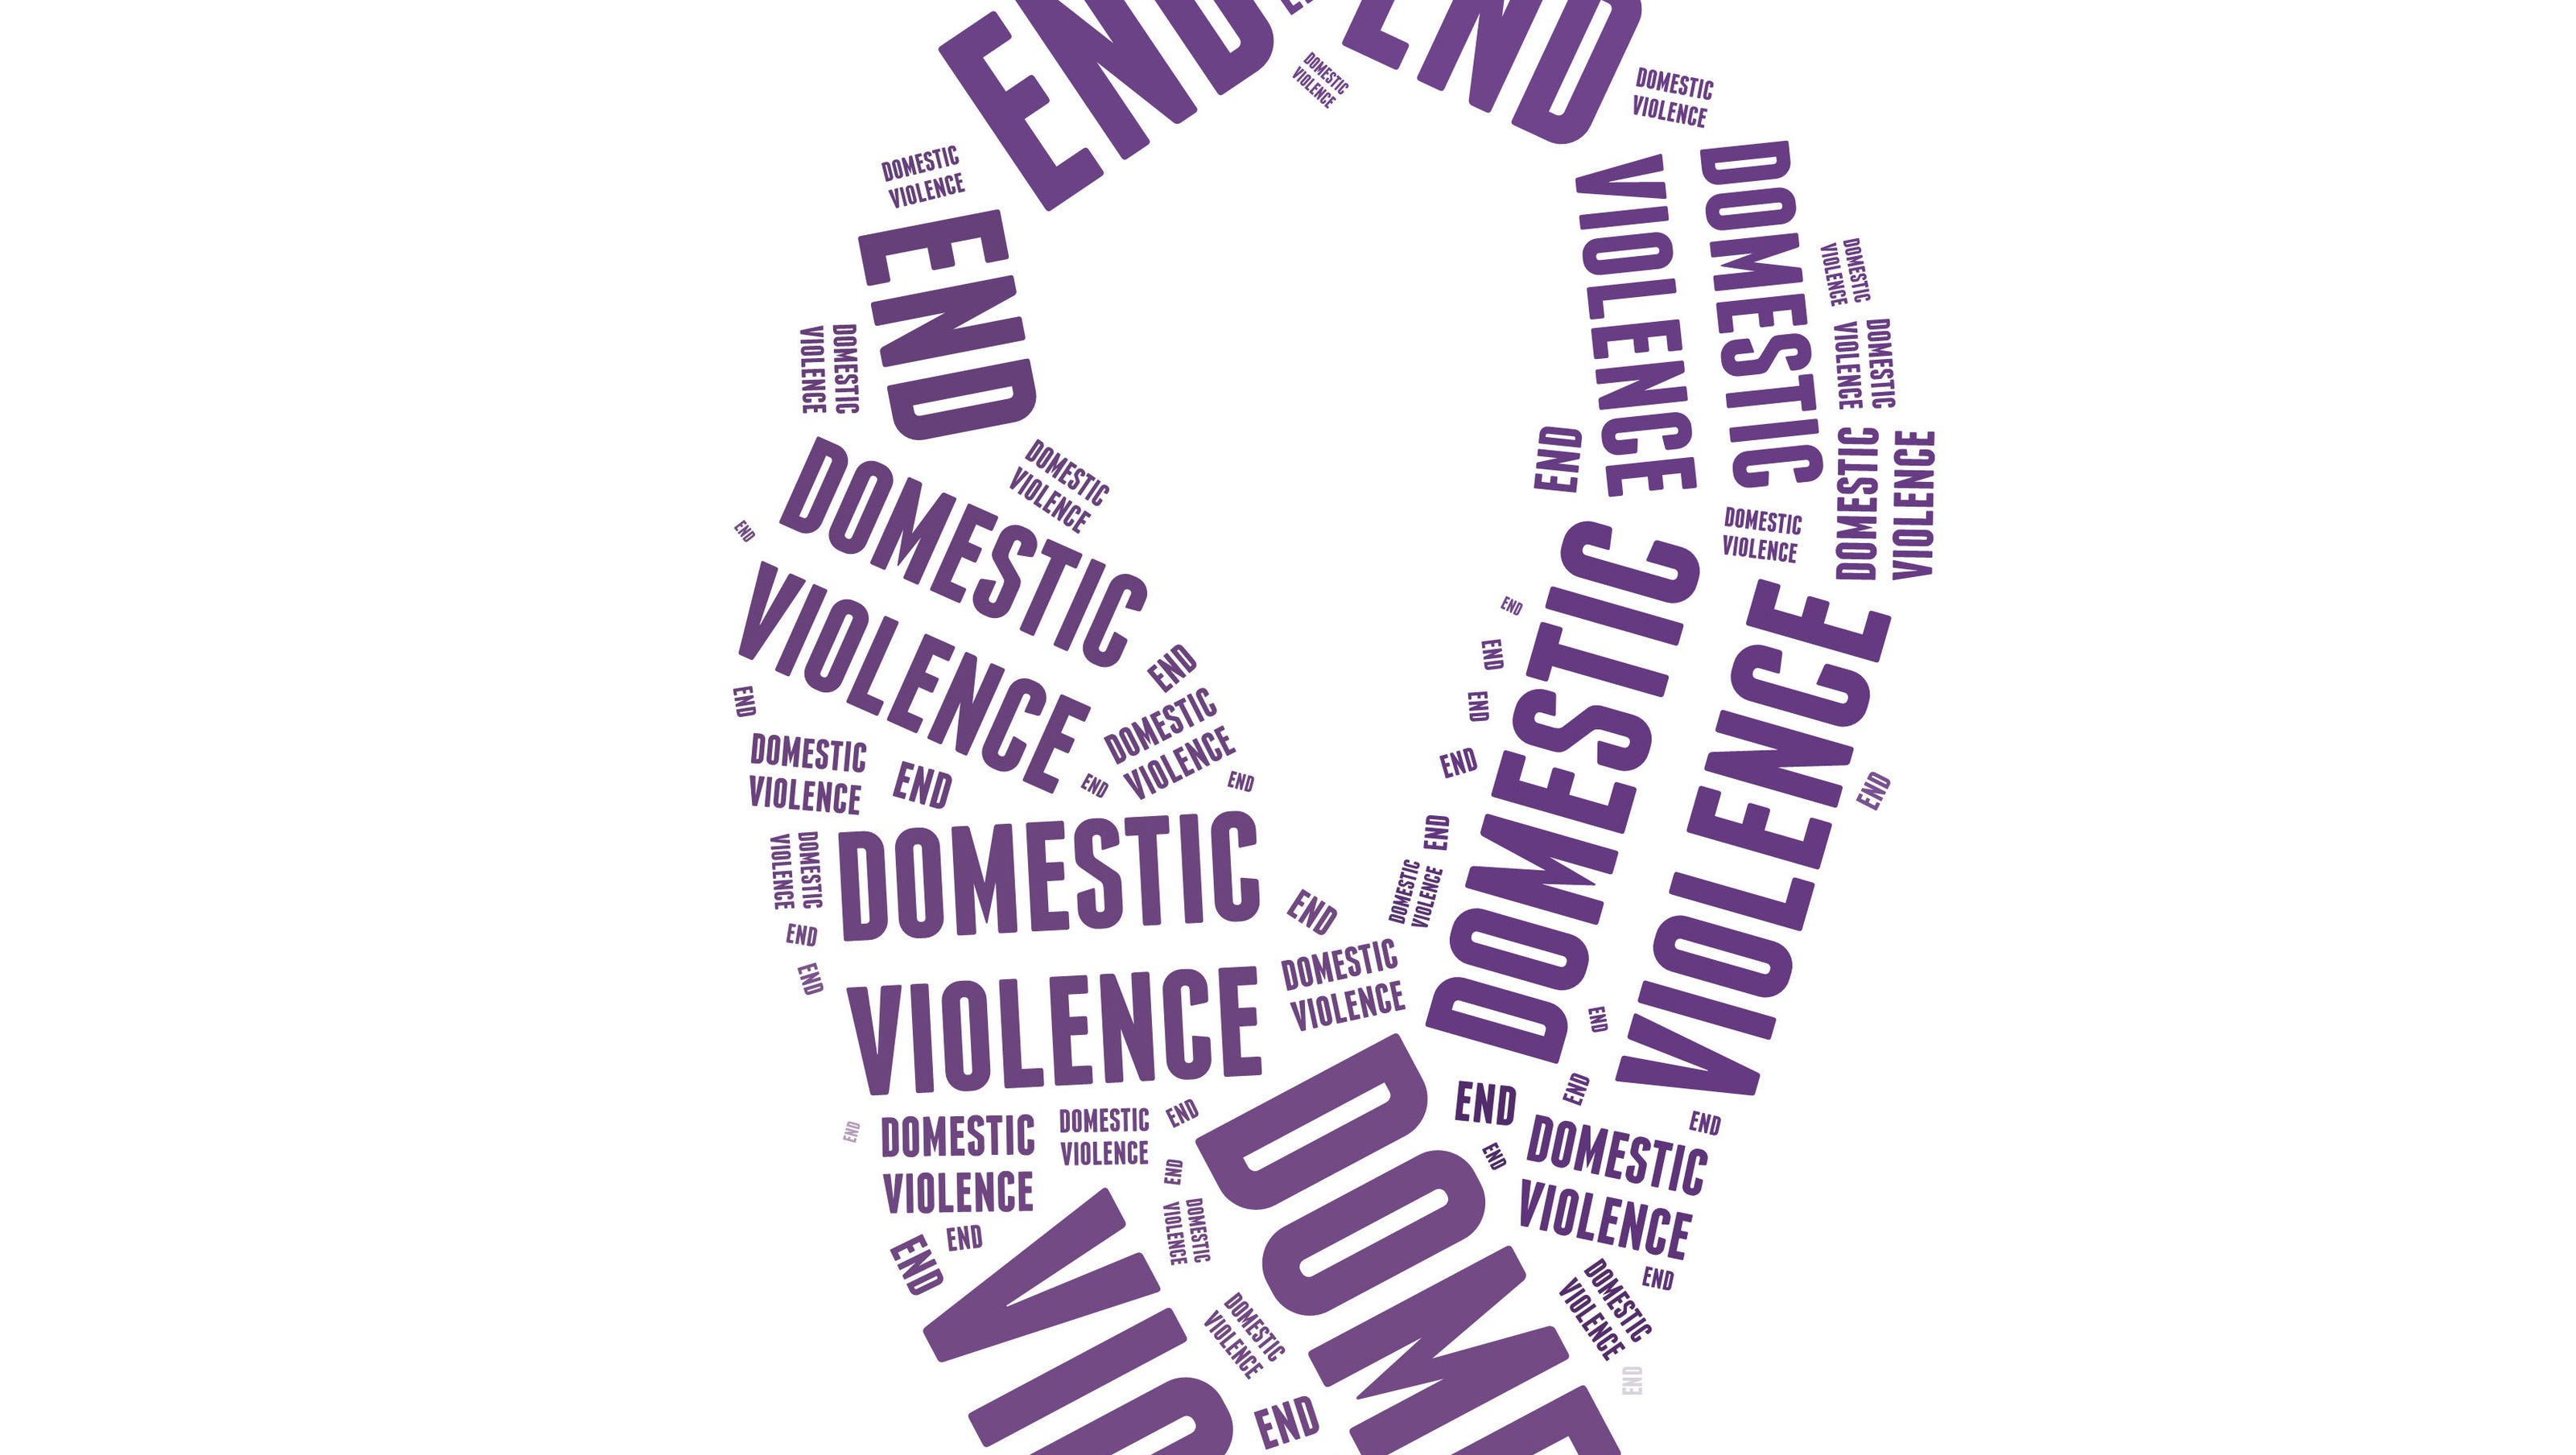 Honor those working to end domestic violence